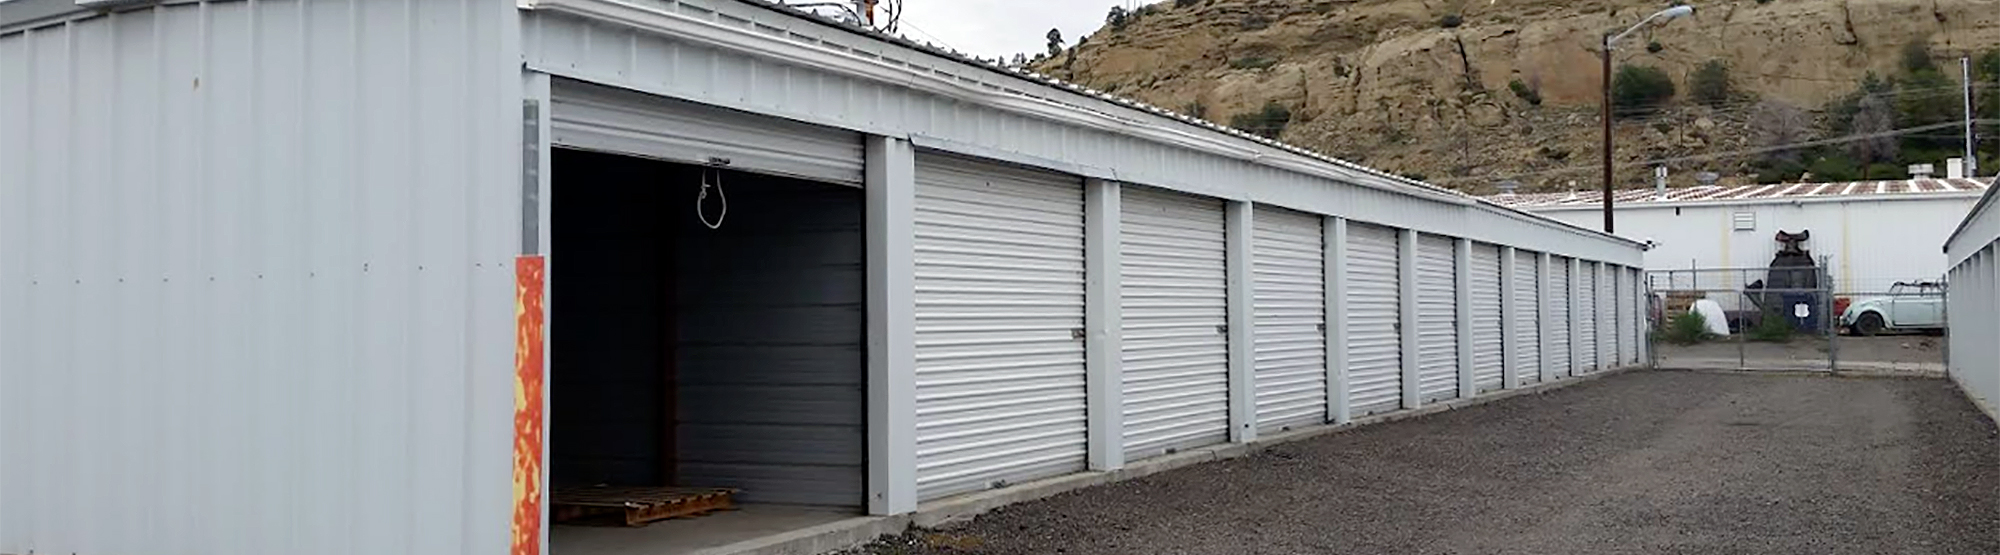 Drive-up access at The Storage Place